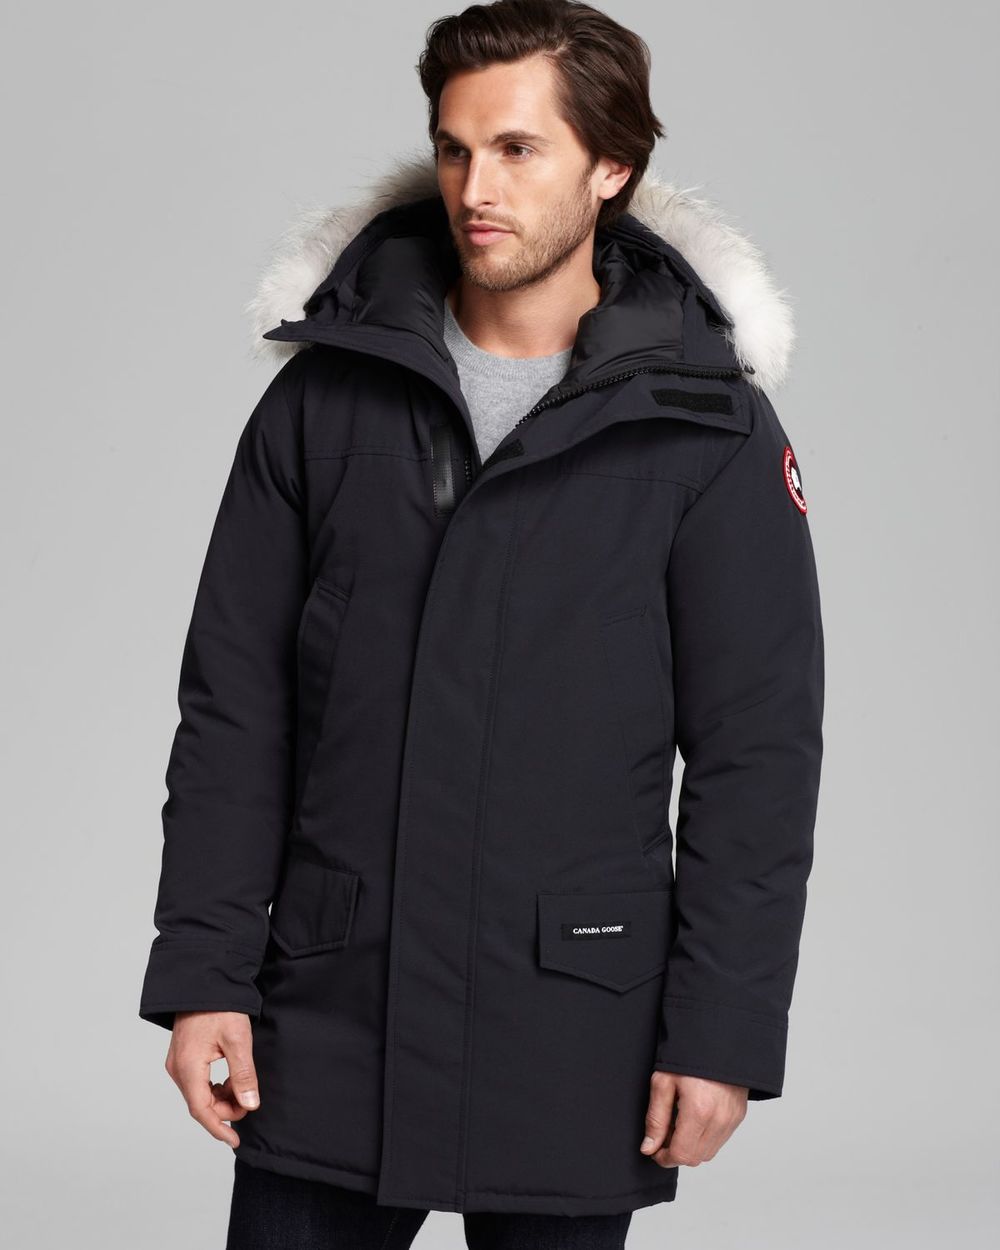 Canada Goose chateau parka replica 2016 - 9 Canada Goose Alternatives To Fit Every Budget �� AS RAKESTRAW ...